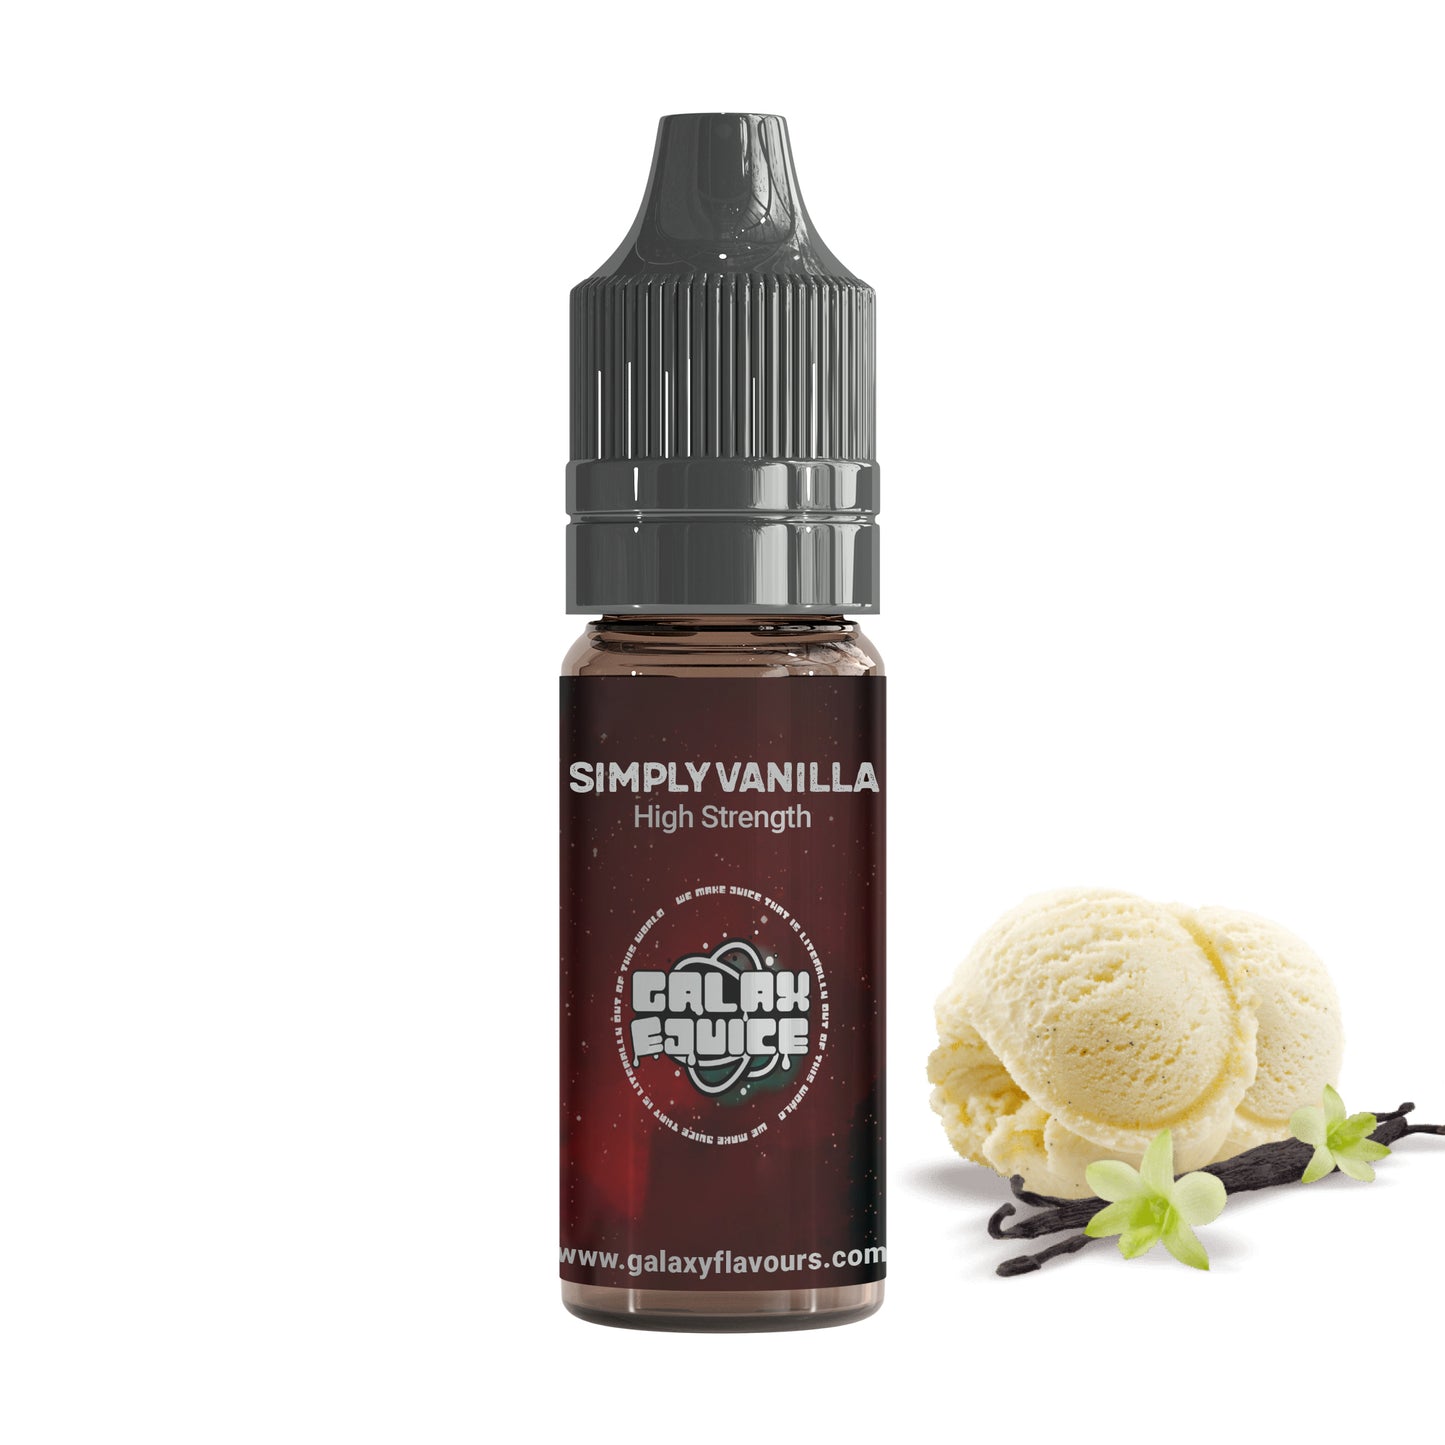 Simply Vanilla High Strength Professional Flavouring.